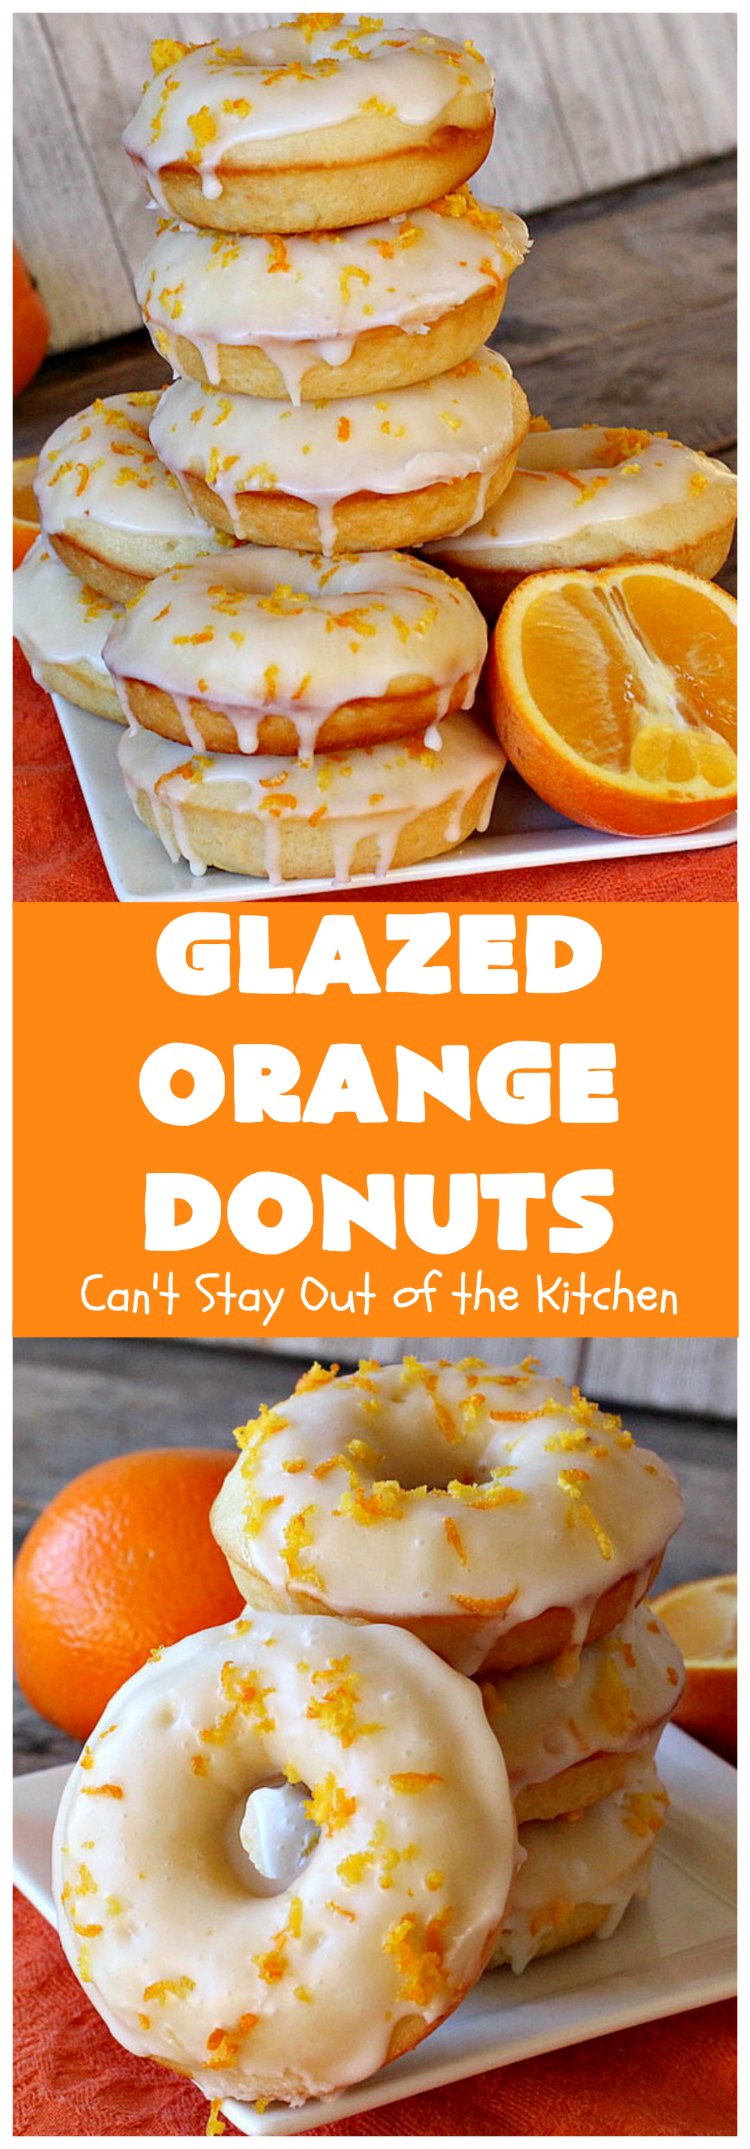 Glazed Orange Donuts | Can't Stay Out of the Kitchen